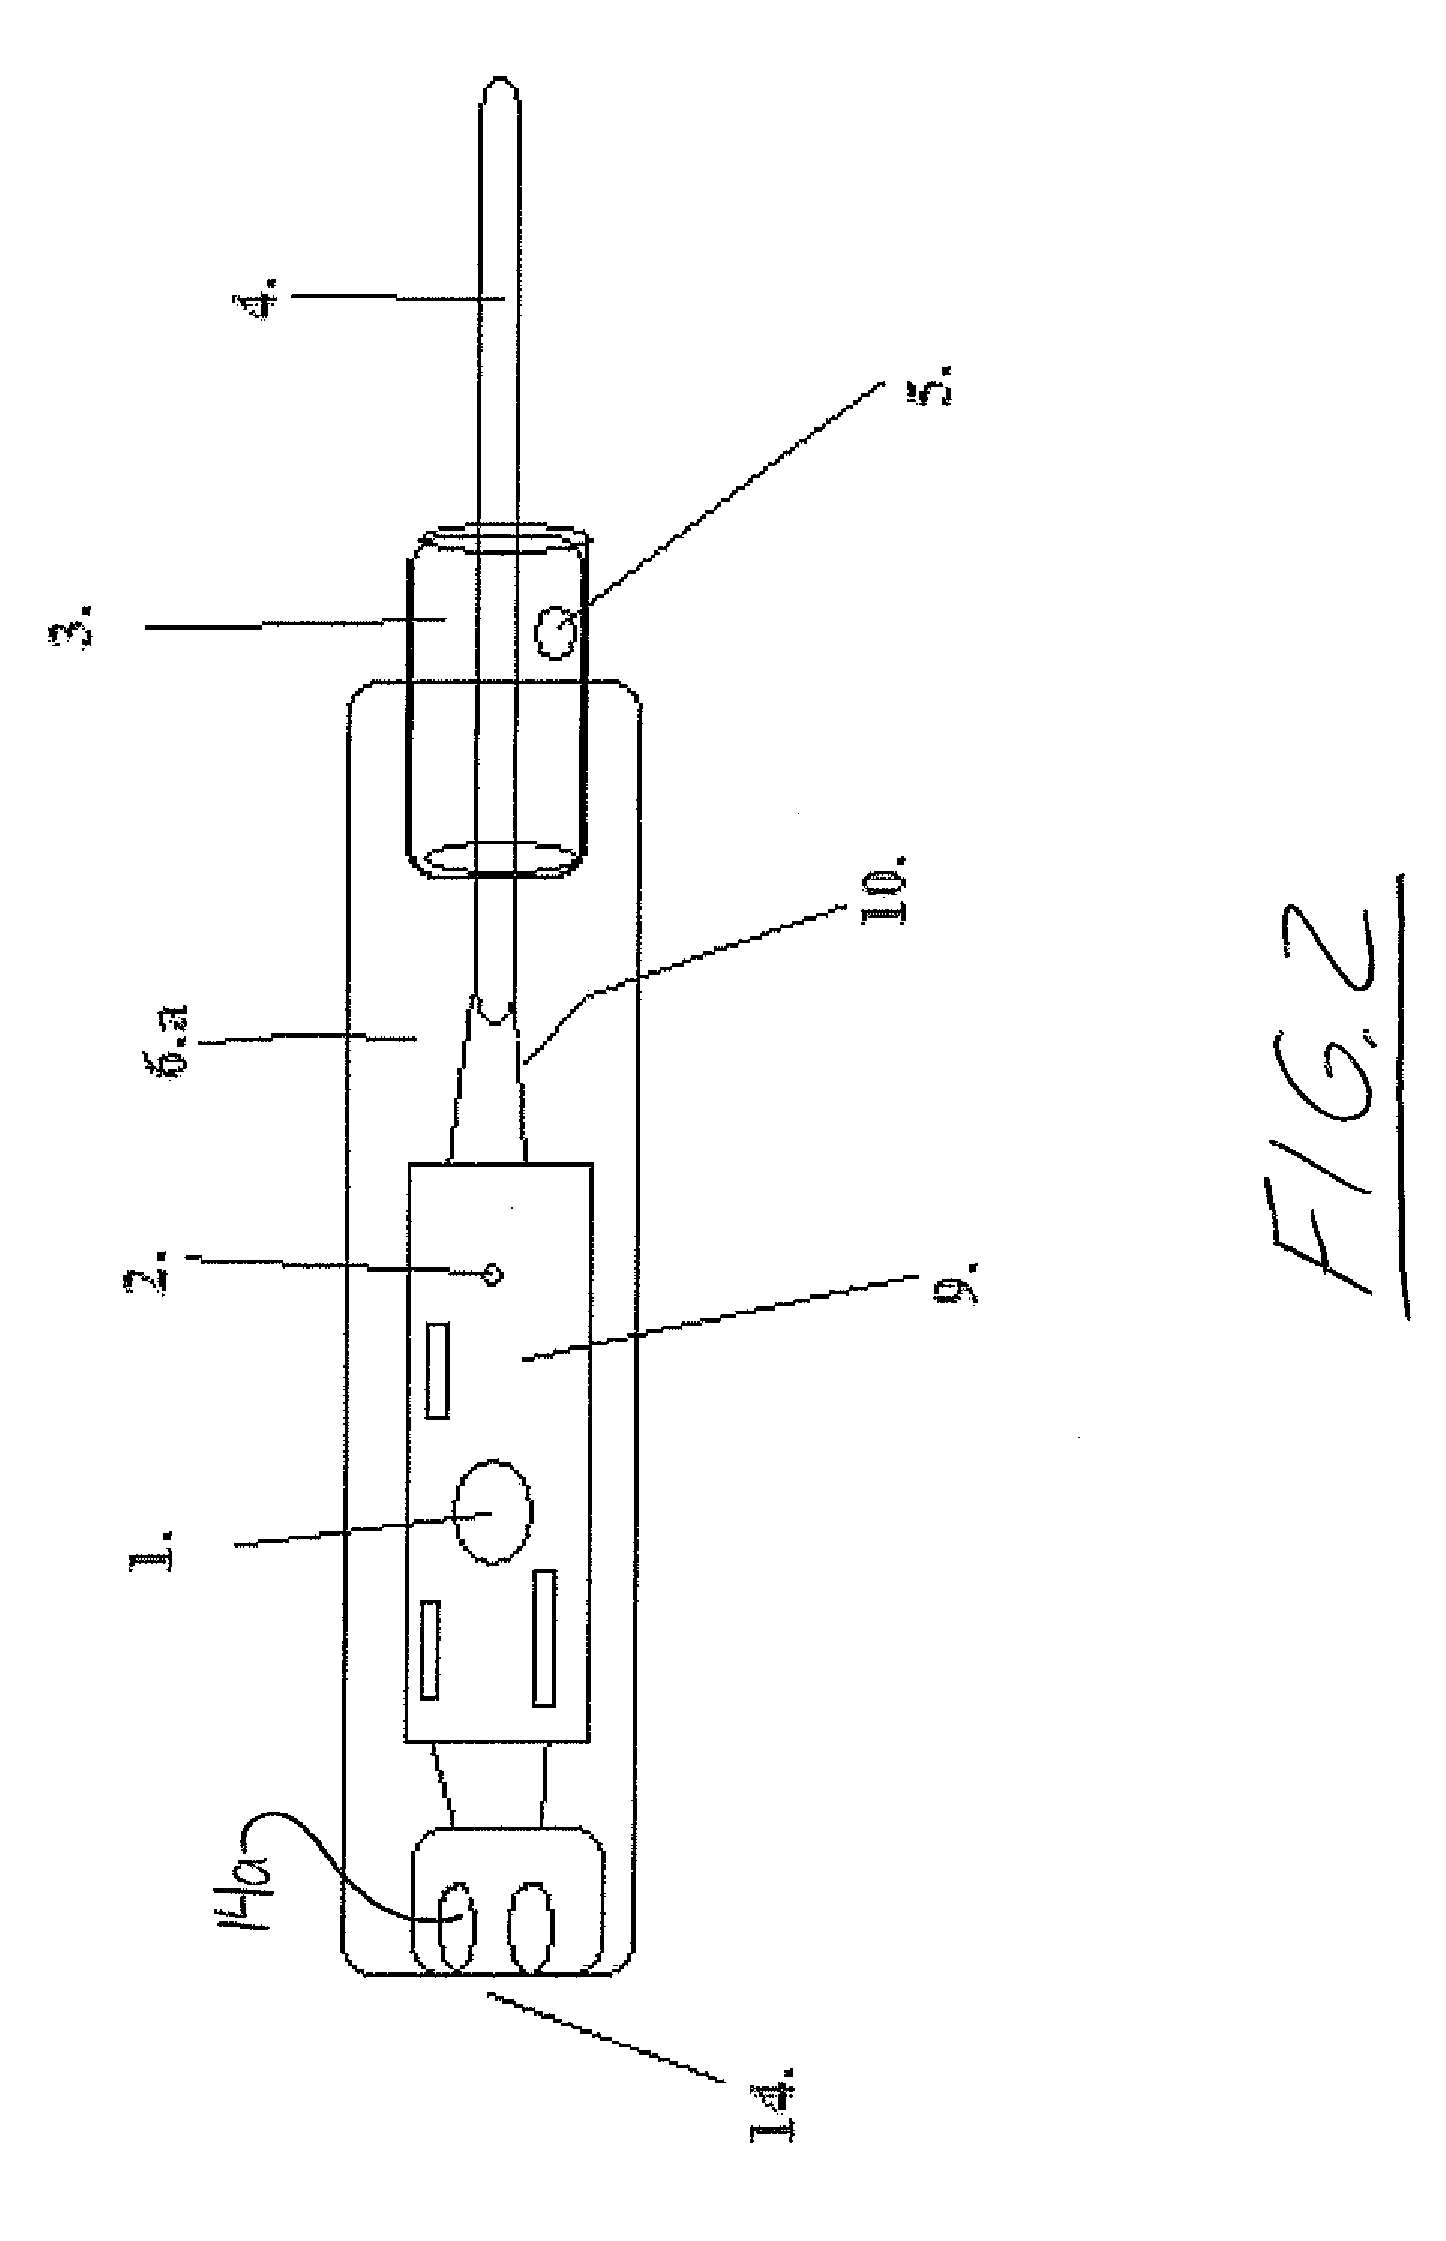 Apparatus and Method for Vaporizing Volatile Material